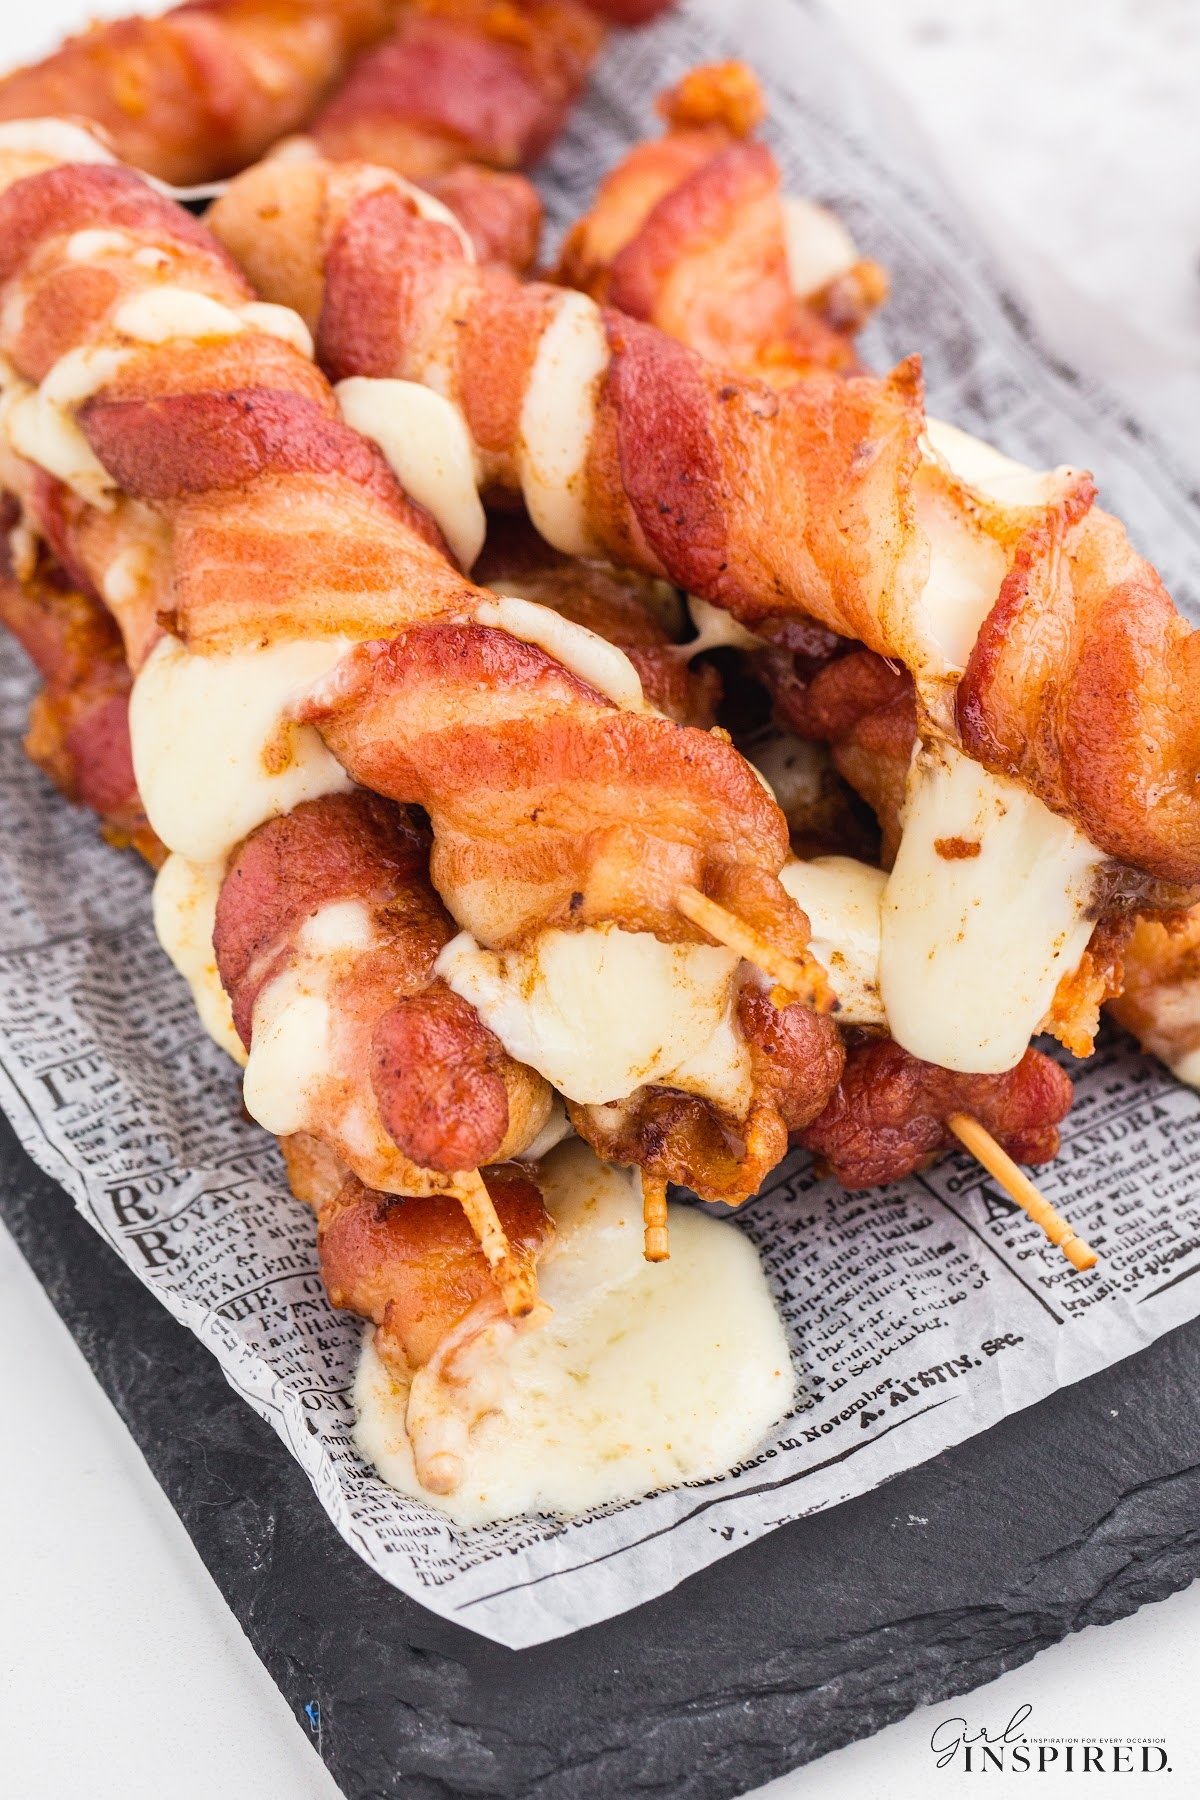 Bacon wrapped mozzarella sticks that have been deep fried with cheese oozing out.